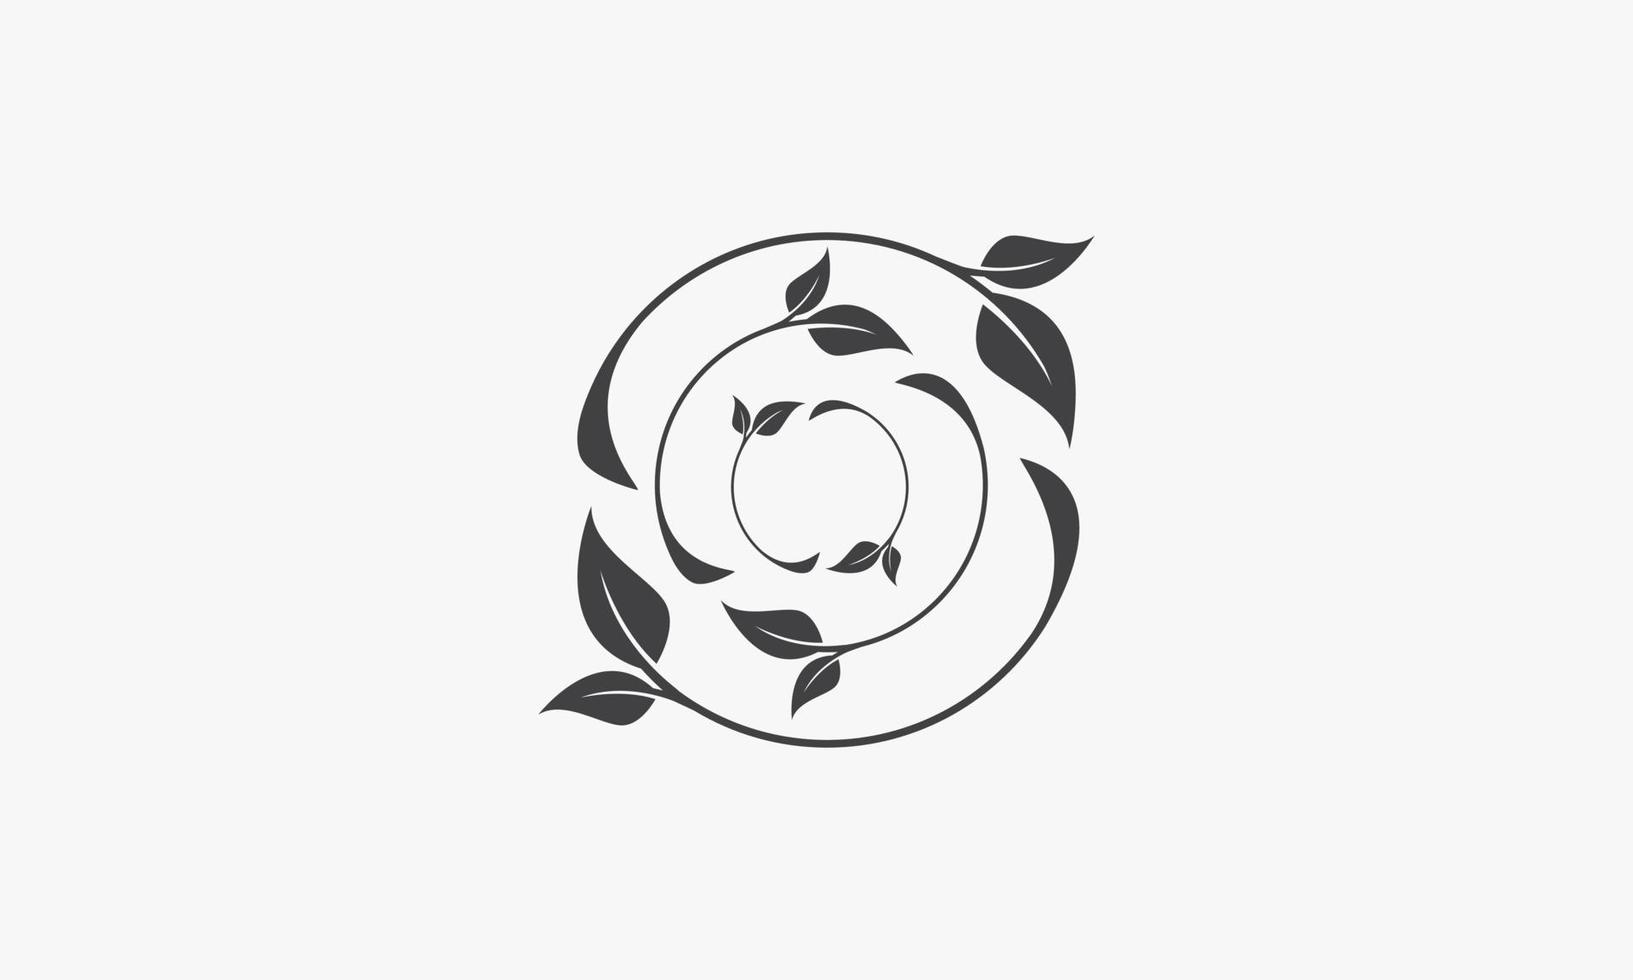 leaf branch circle vector illustration on white background. creative icon.